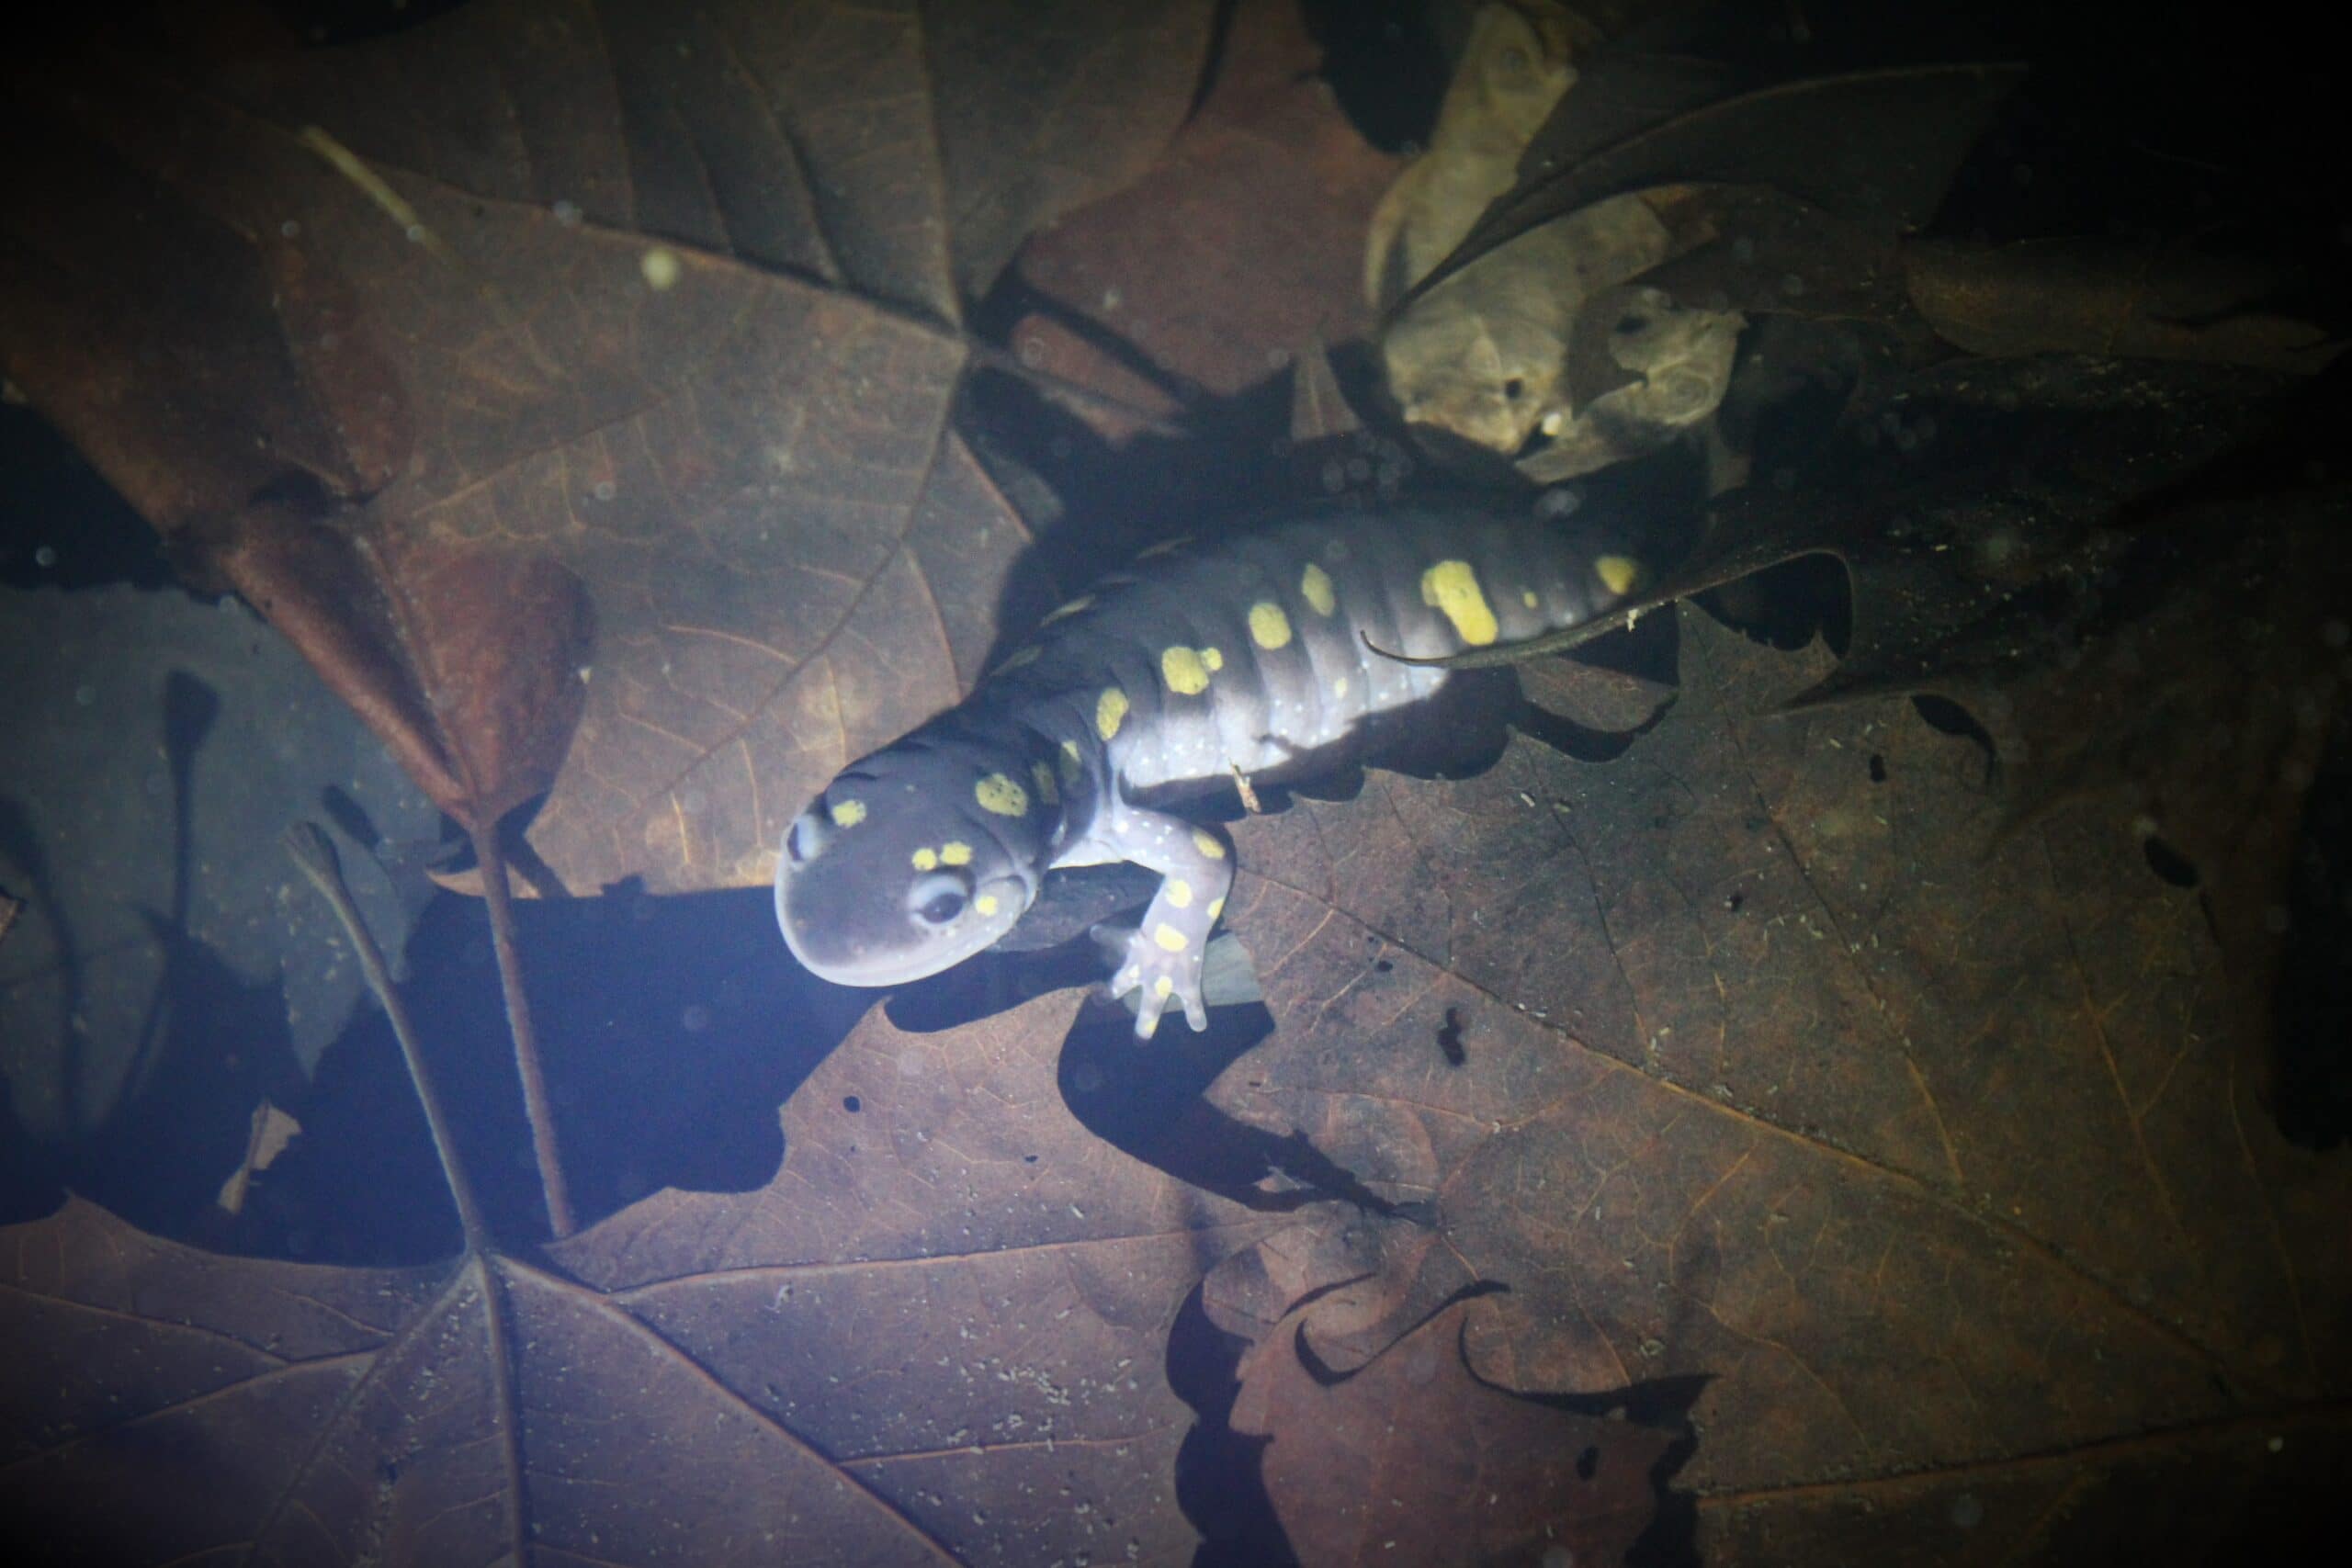 A spotted salamander with yellow spots swimming over a pile of leaves in the water.